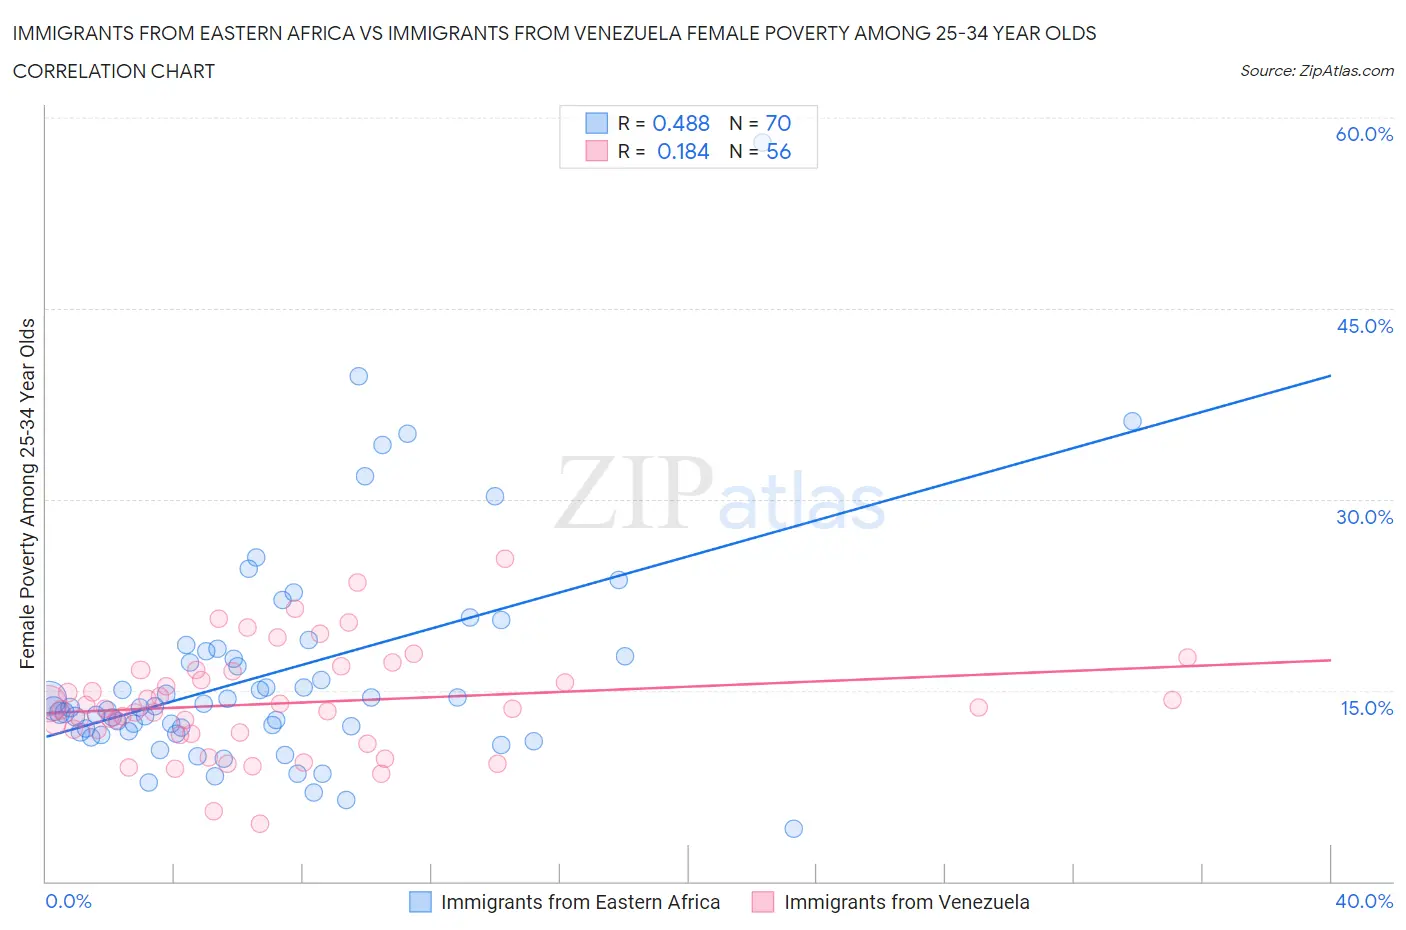 Immigrants from Eastern Africa vs Immigrants from Venezuela Female Poverty Among 25-34 Year Olds